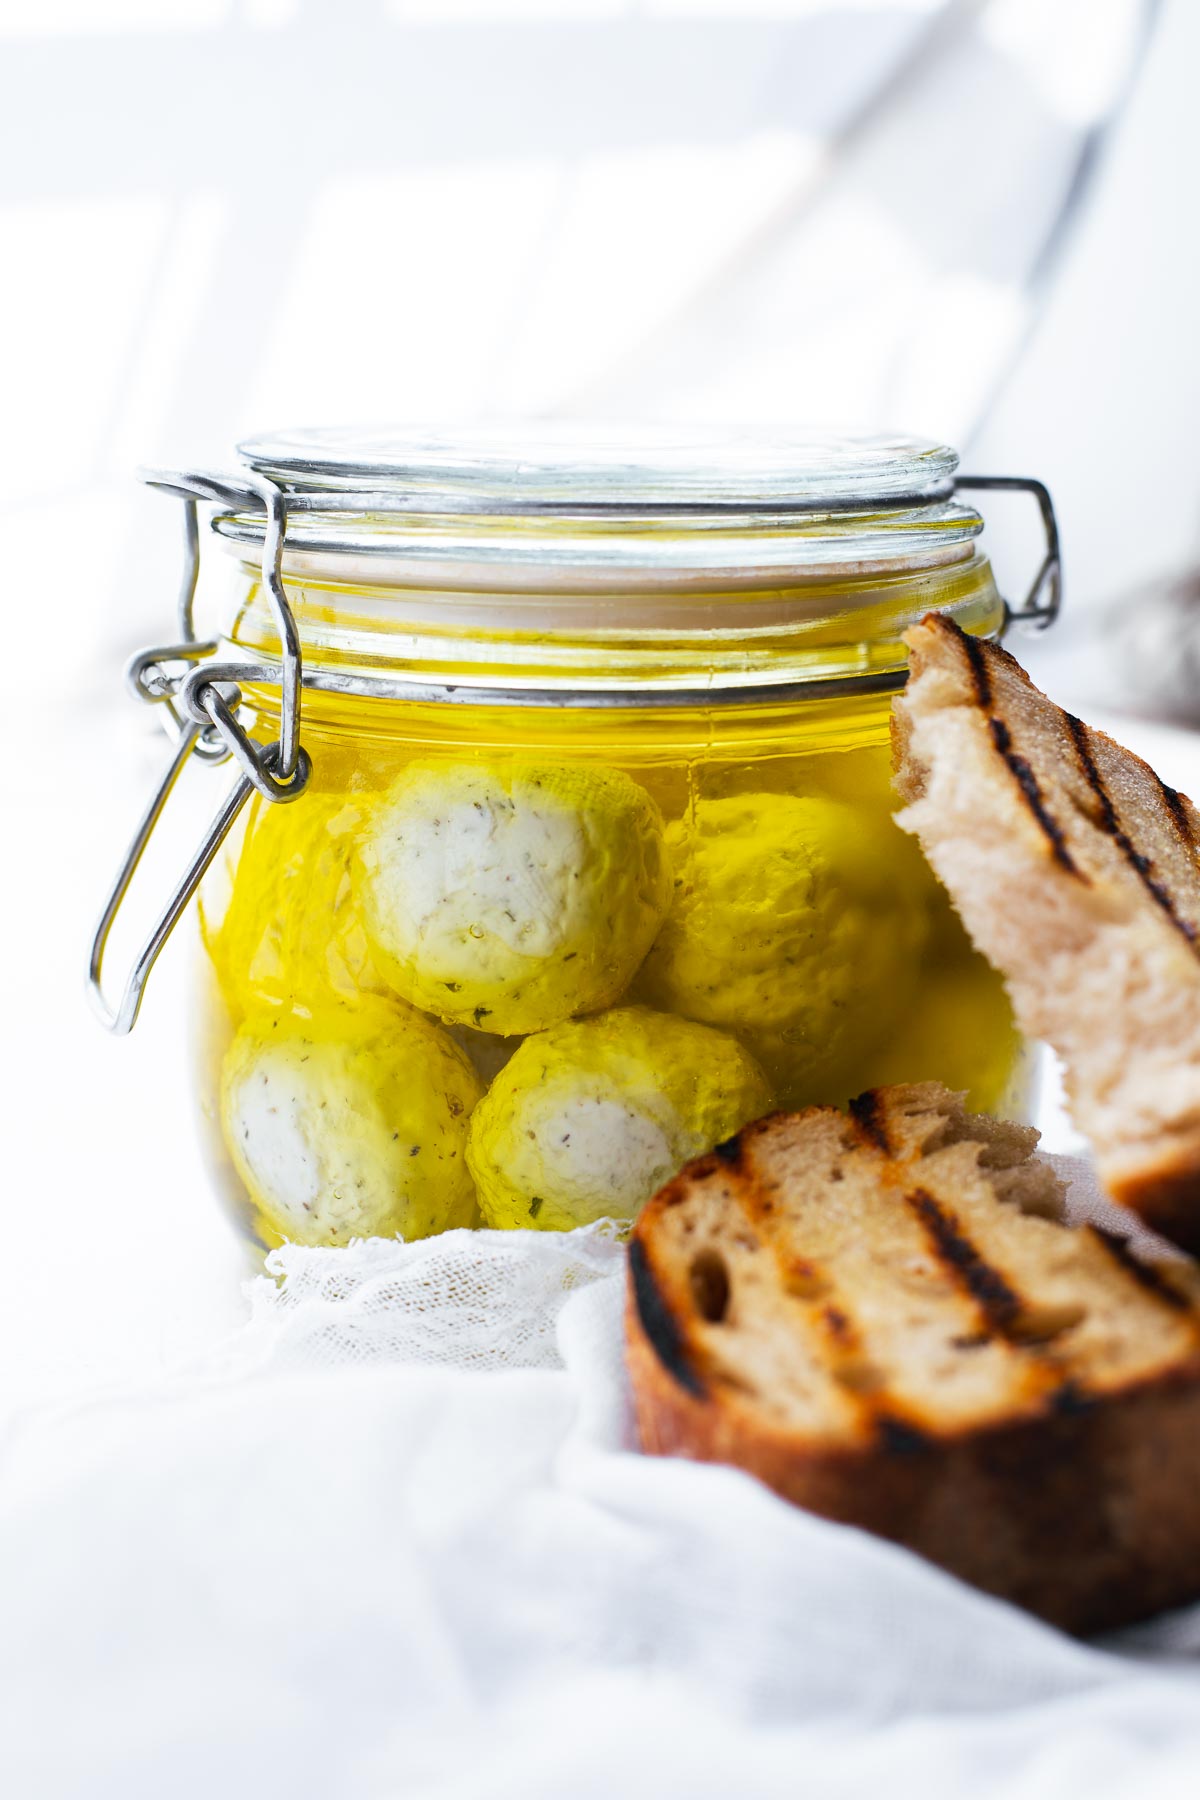 Garlic and herb labneh balls in olive oil, stored in a glass jar and served with toasted sourdough.